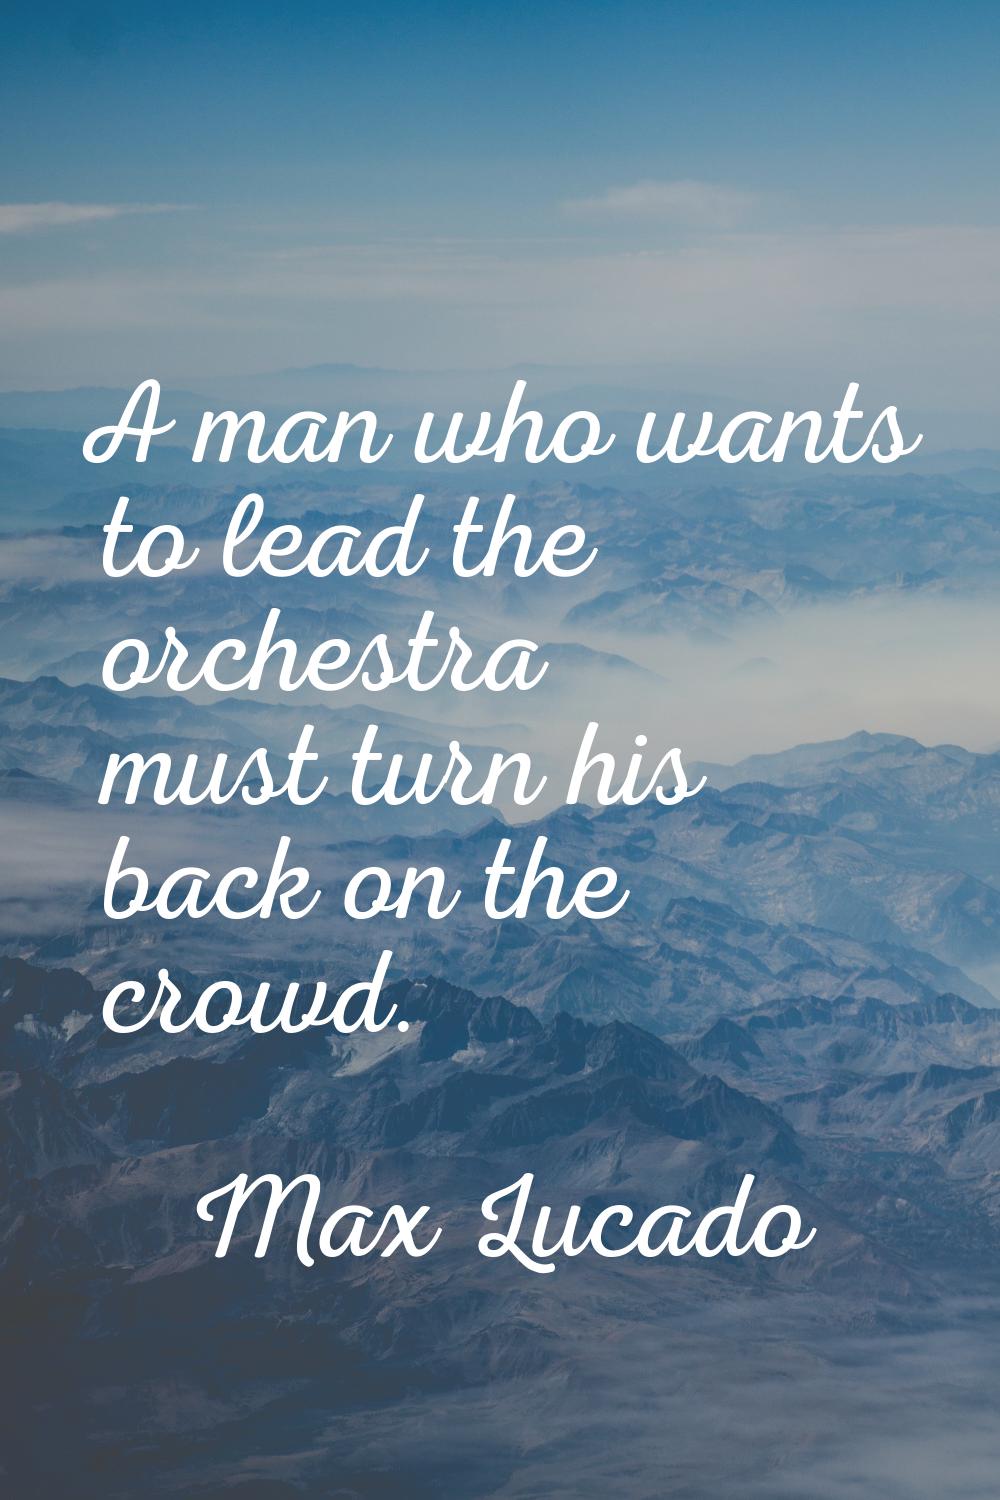 A man who wants to lead the orchestra must turn his back on the crowd.